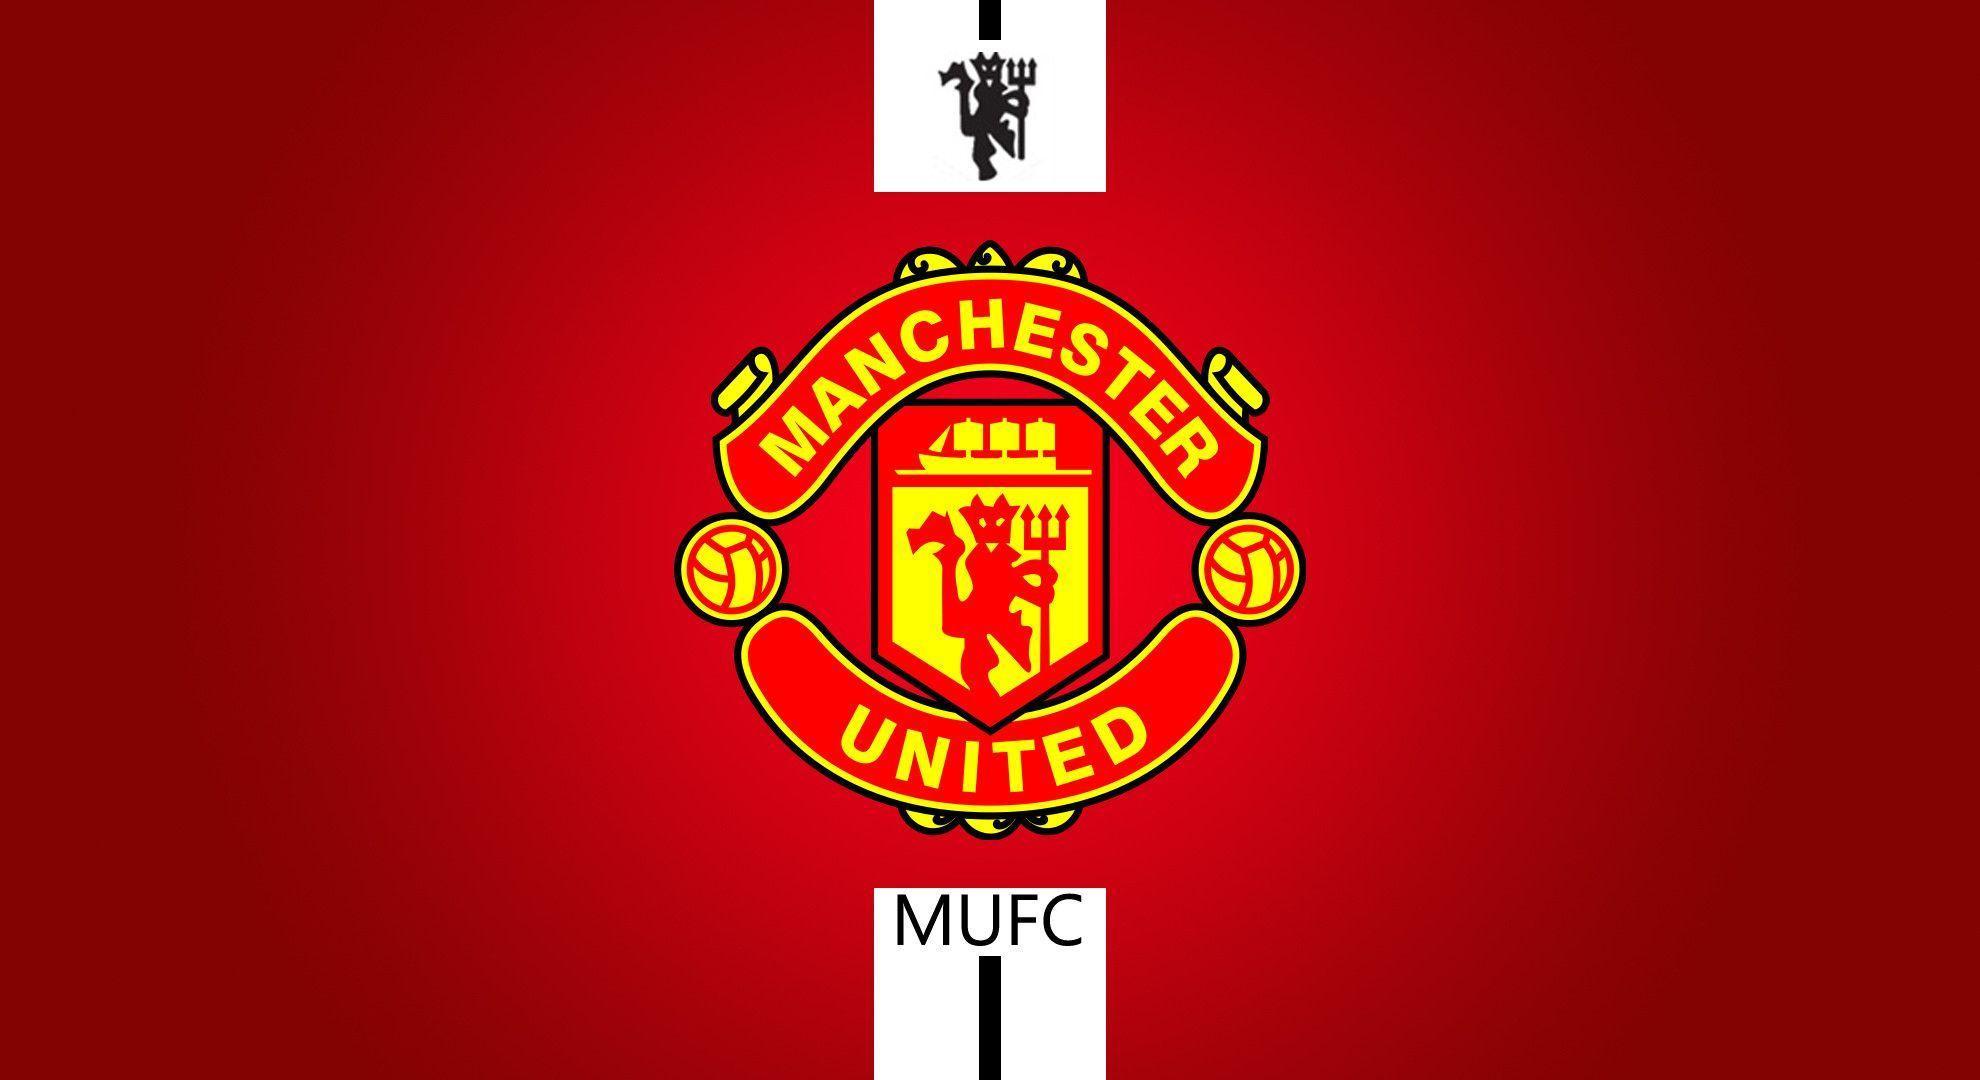 1980 x 1080 · jpeg - Manchester United Wallpapers - Wallpaper Cave